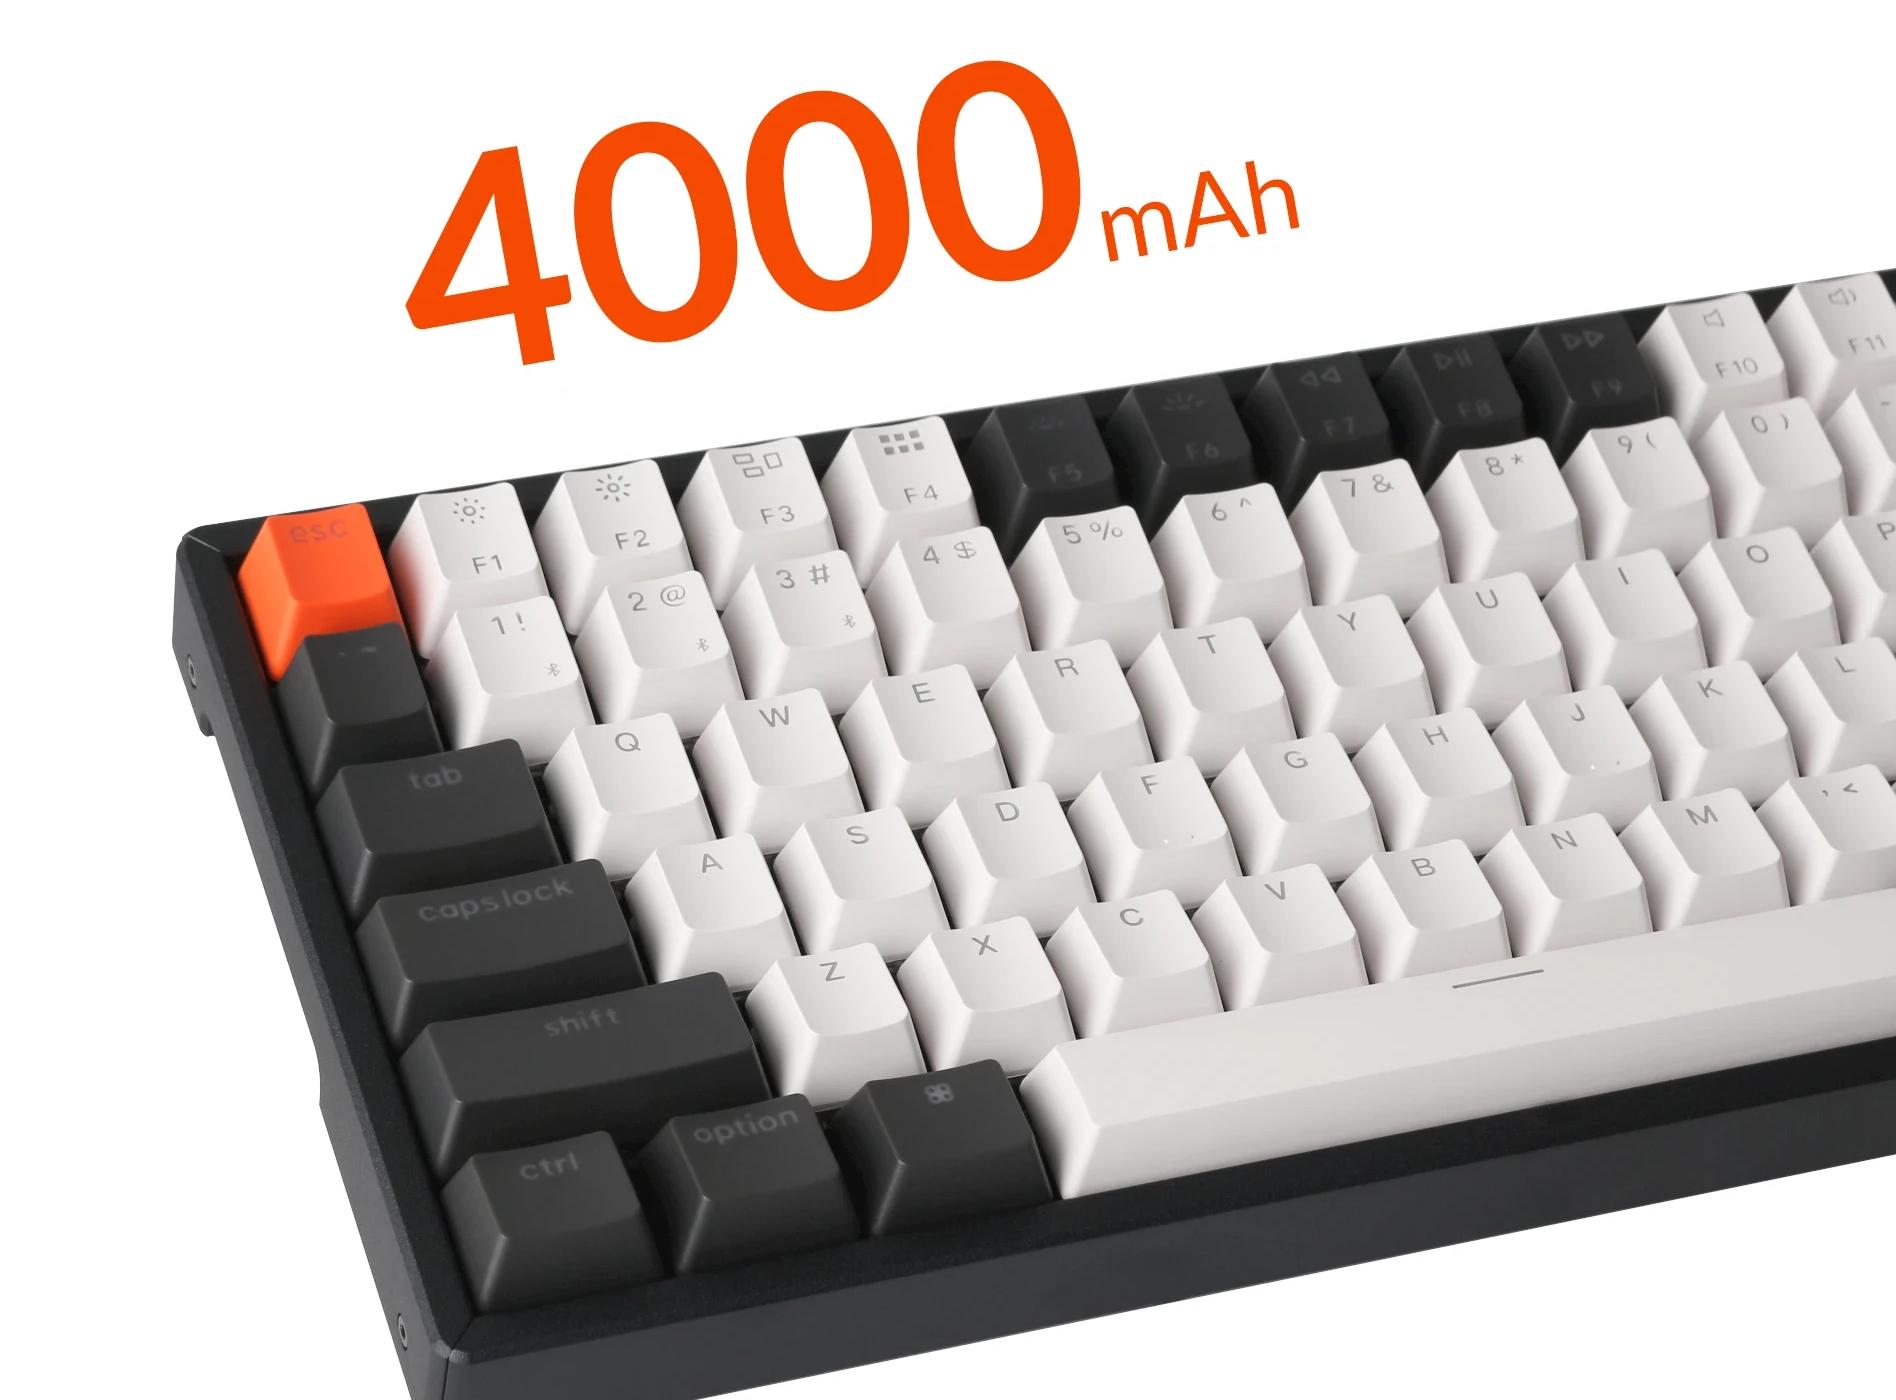 Keychron k2 hot-swappable wireless mechanical keyboard The most funded Kickstarter keyboard with double shot keycaps